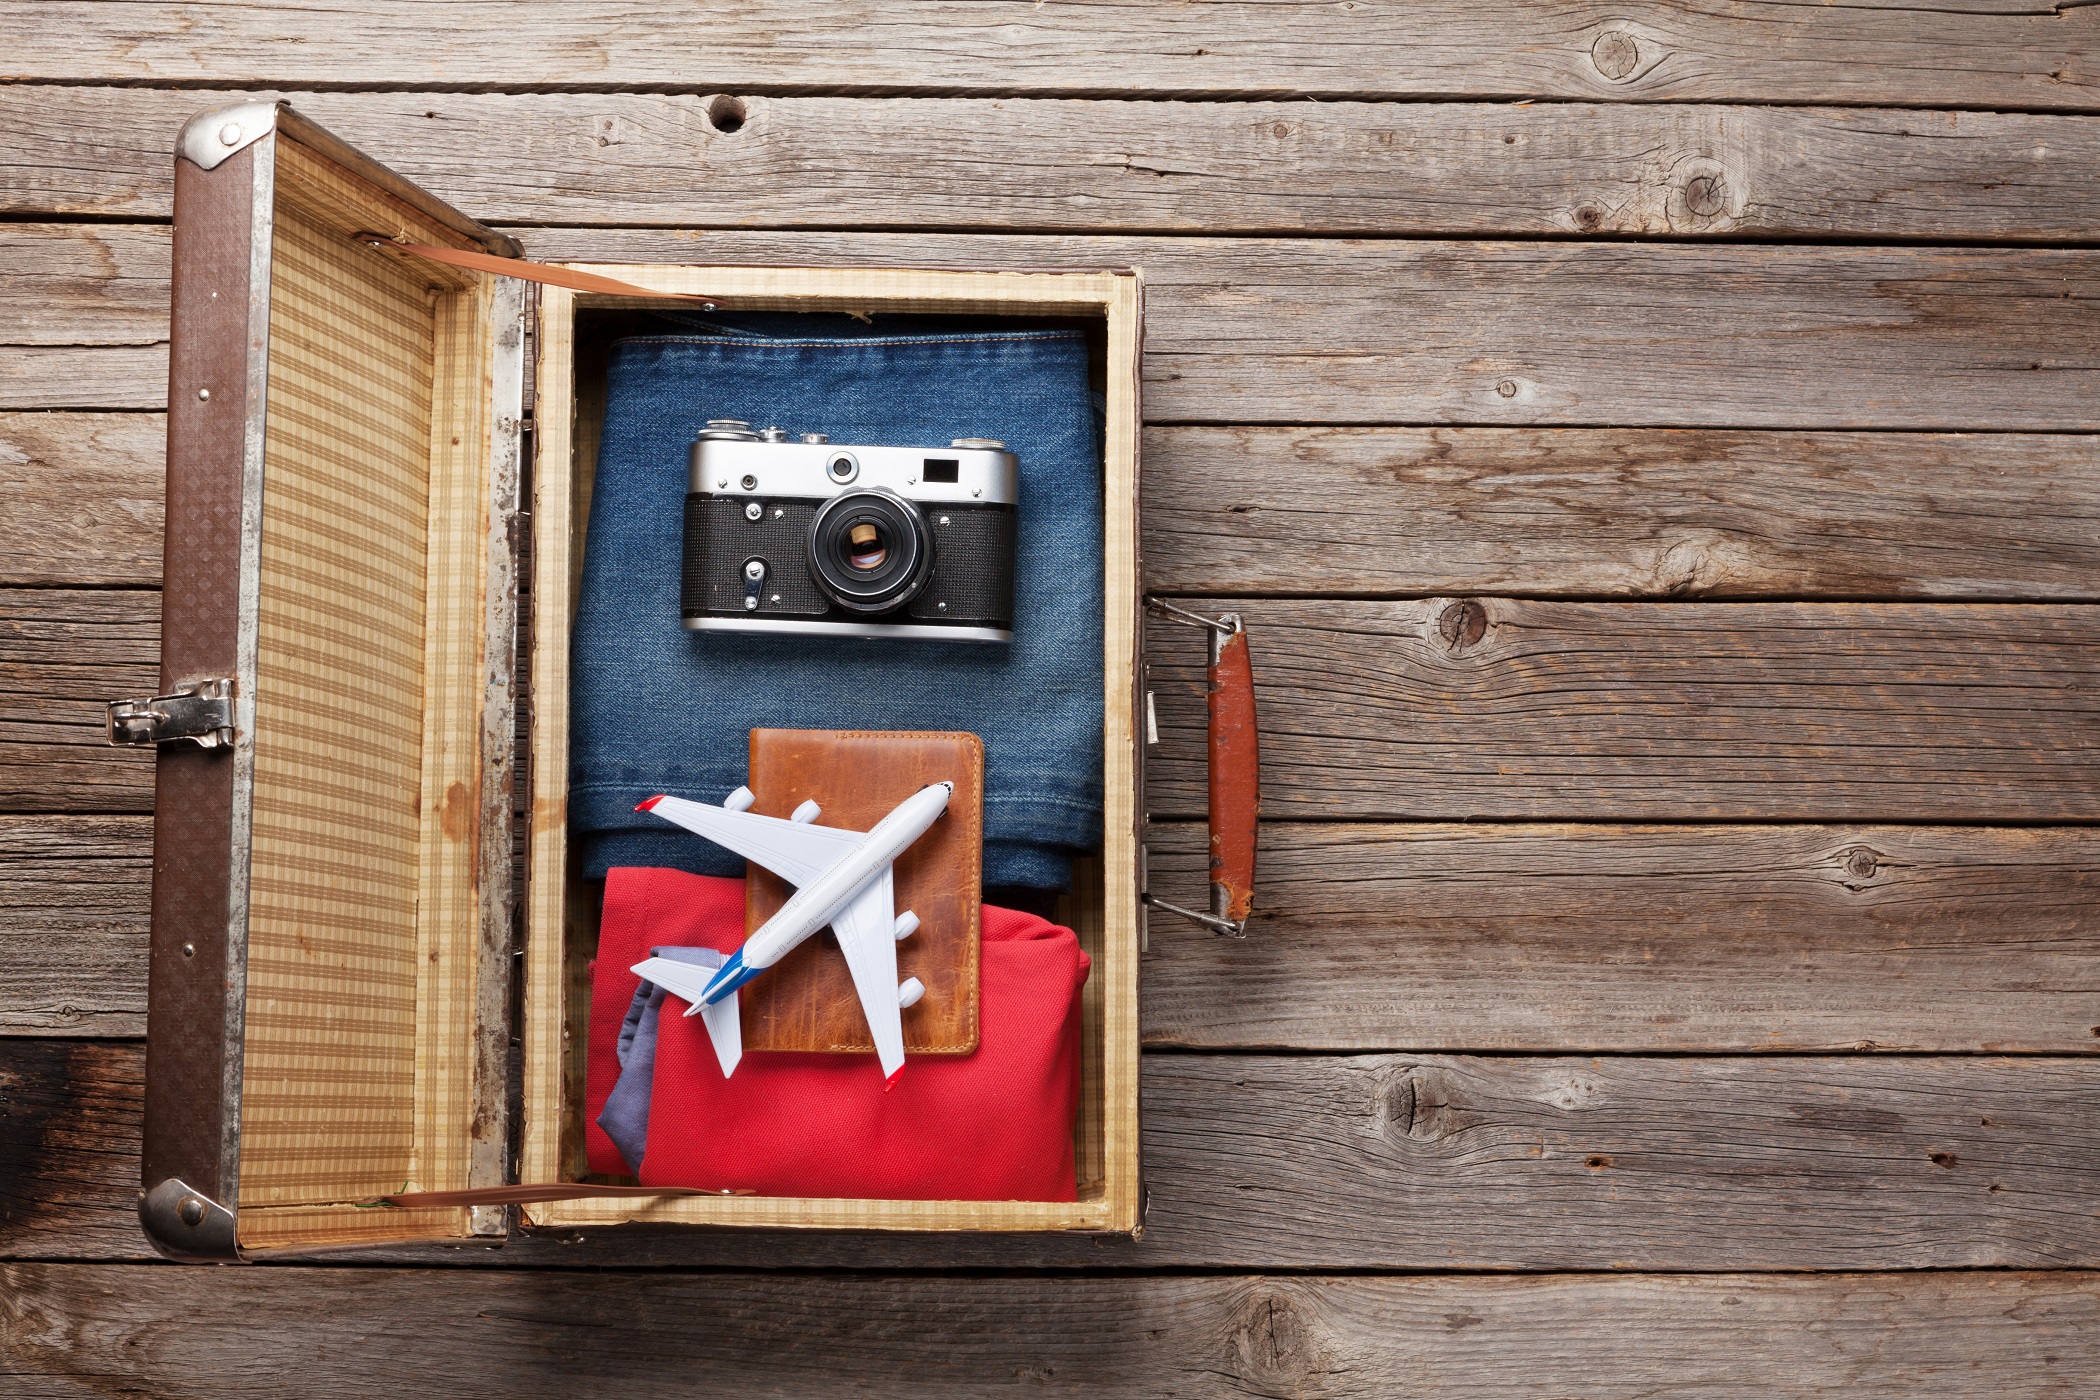 Topview of retro travel equipment on a wooden table. Vintage